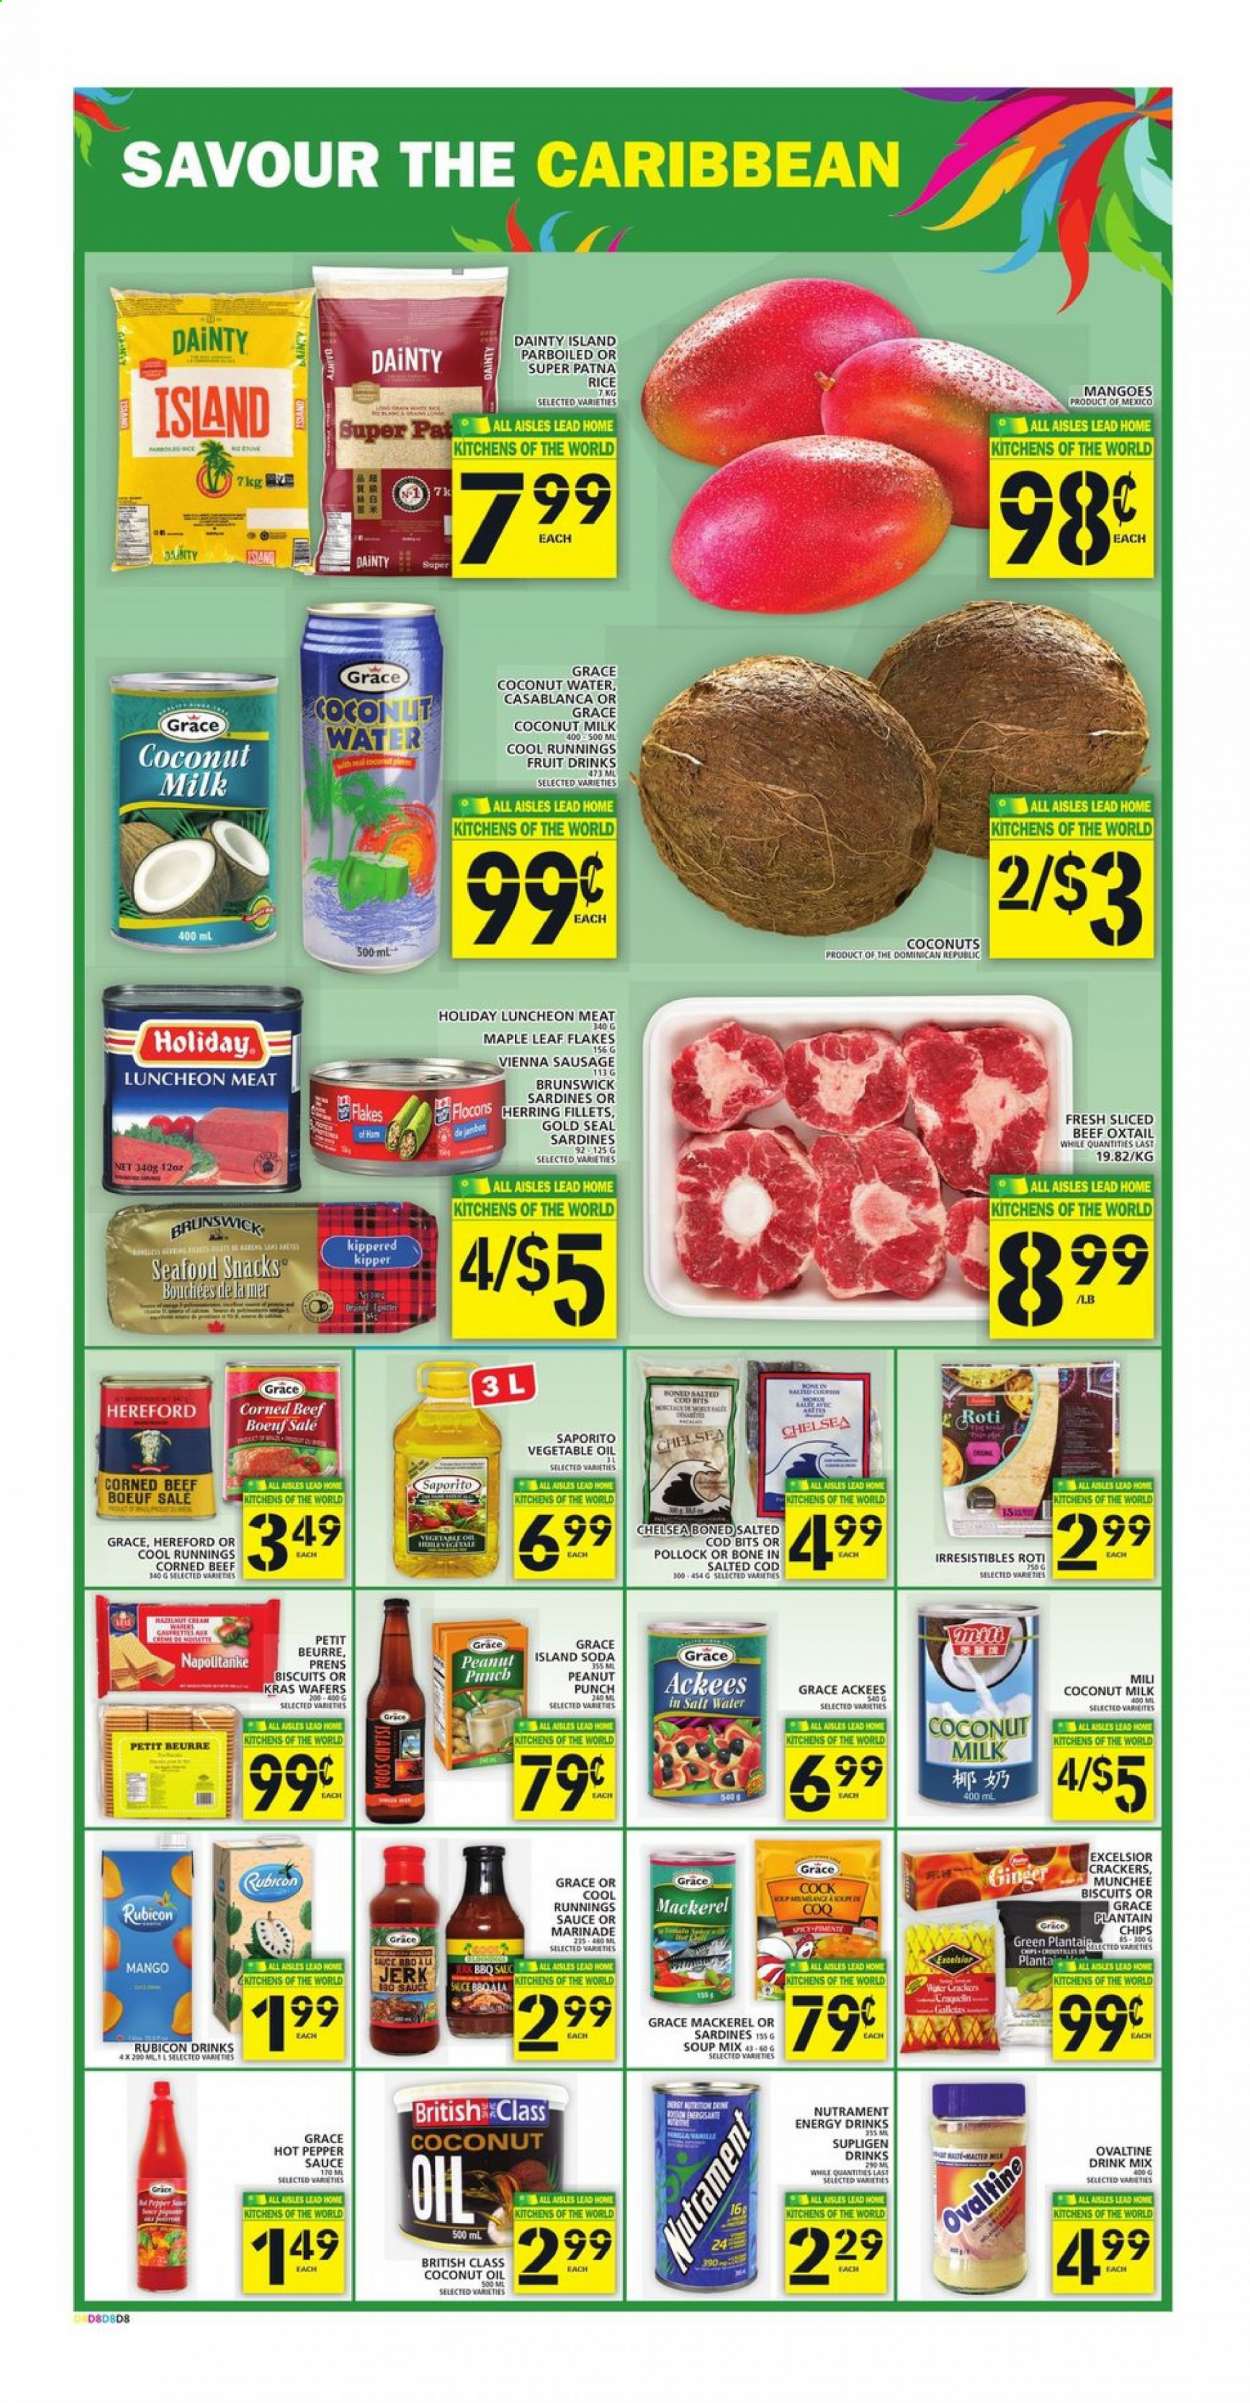 thumbnail - Food Basics Flyer - July 22, 2021 - July 28, 2021 - Sales products - roti, ginger, soup mix, snack, cod, mackerel, sardines, herring, pollock, soup, sauce, sausage, vienna sausage, lunch meat, corned beef, plant-based milk, wafers, crackers, biscuit, chips, coconut milk, canned fruit, canned fish, canned meat, marinade, coconut oil, vegetable oil, juice, energy drink, fruit drink, coconut water, soda, powder drink, oxtail. Page 11.